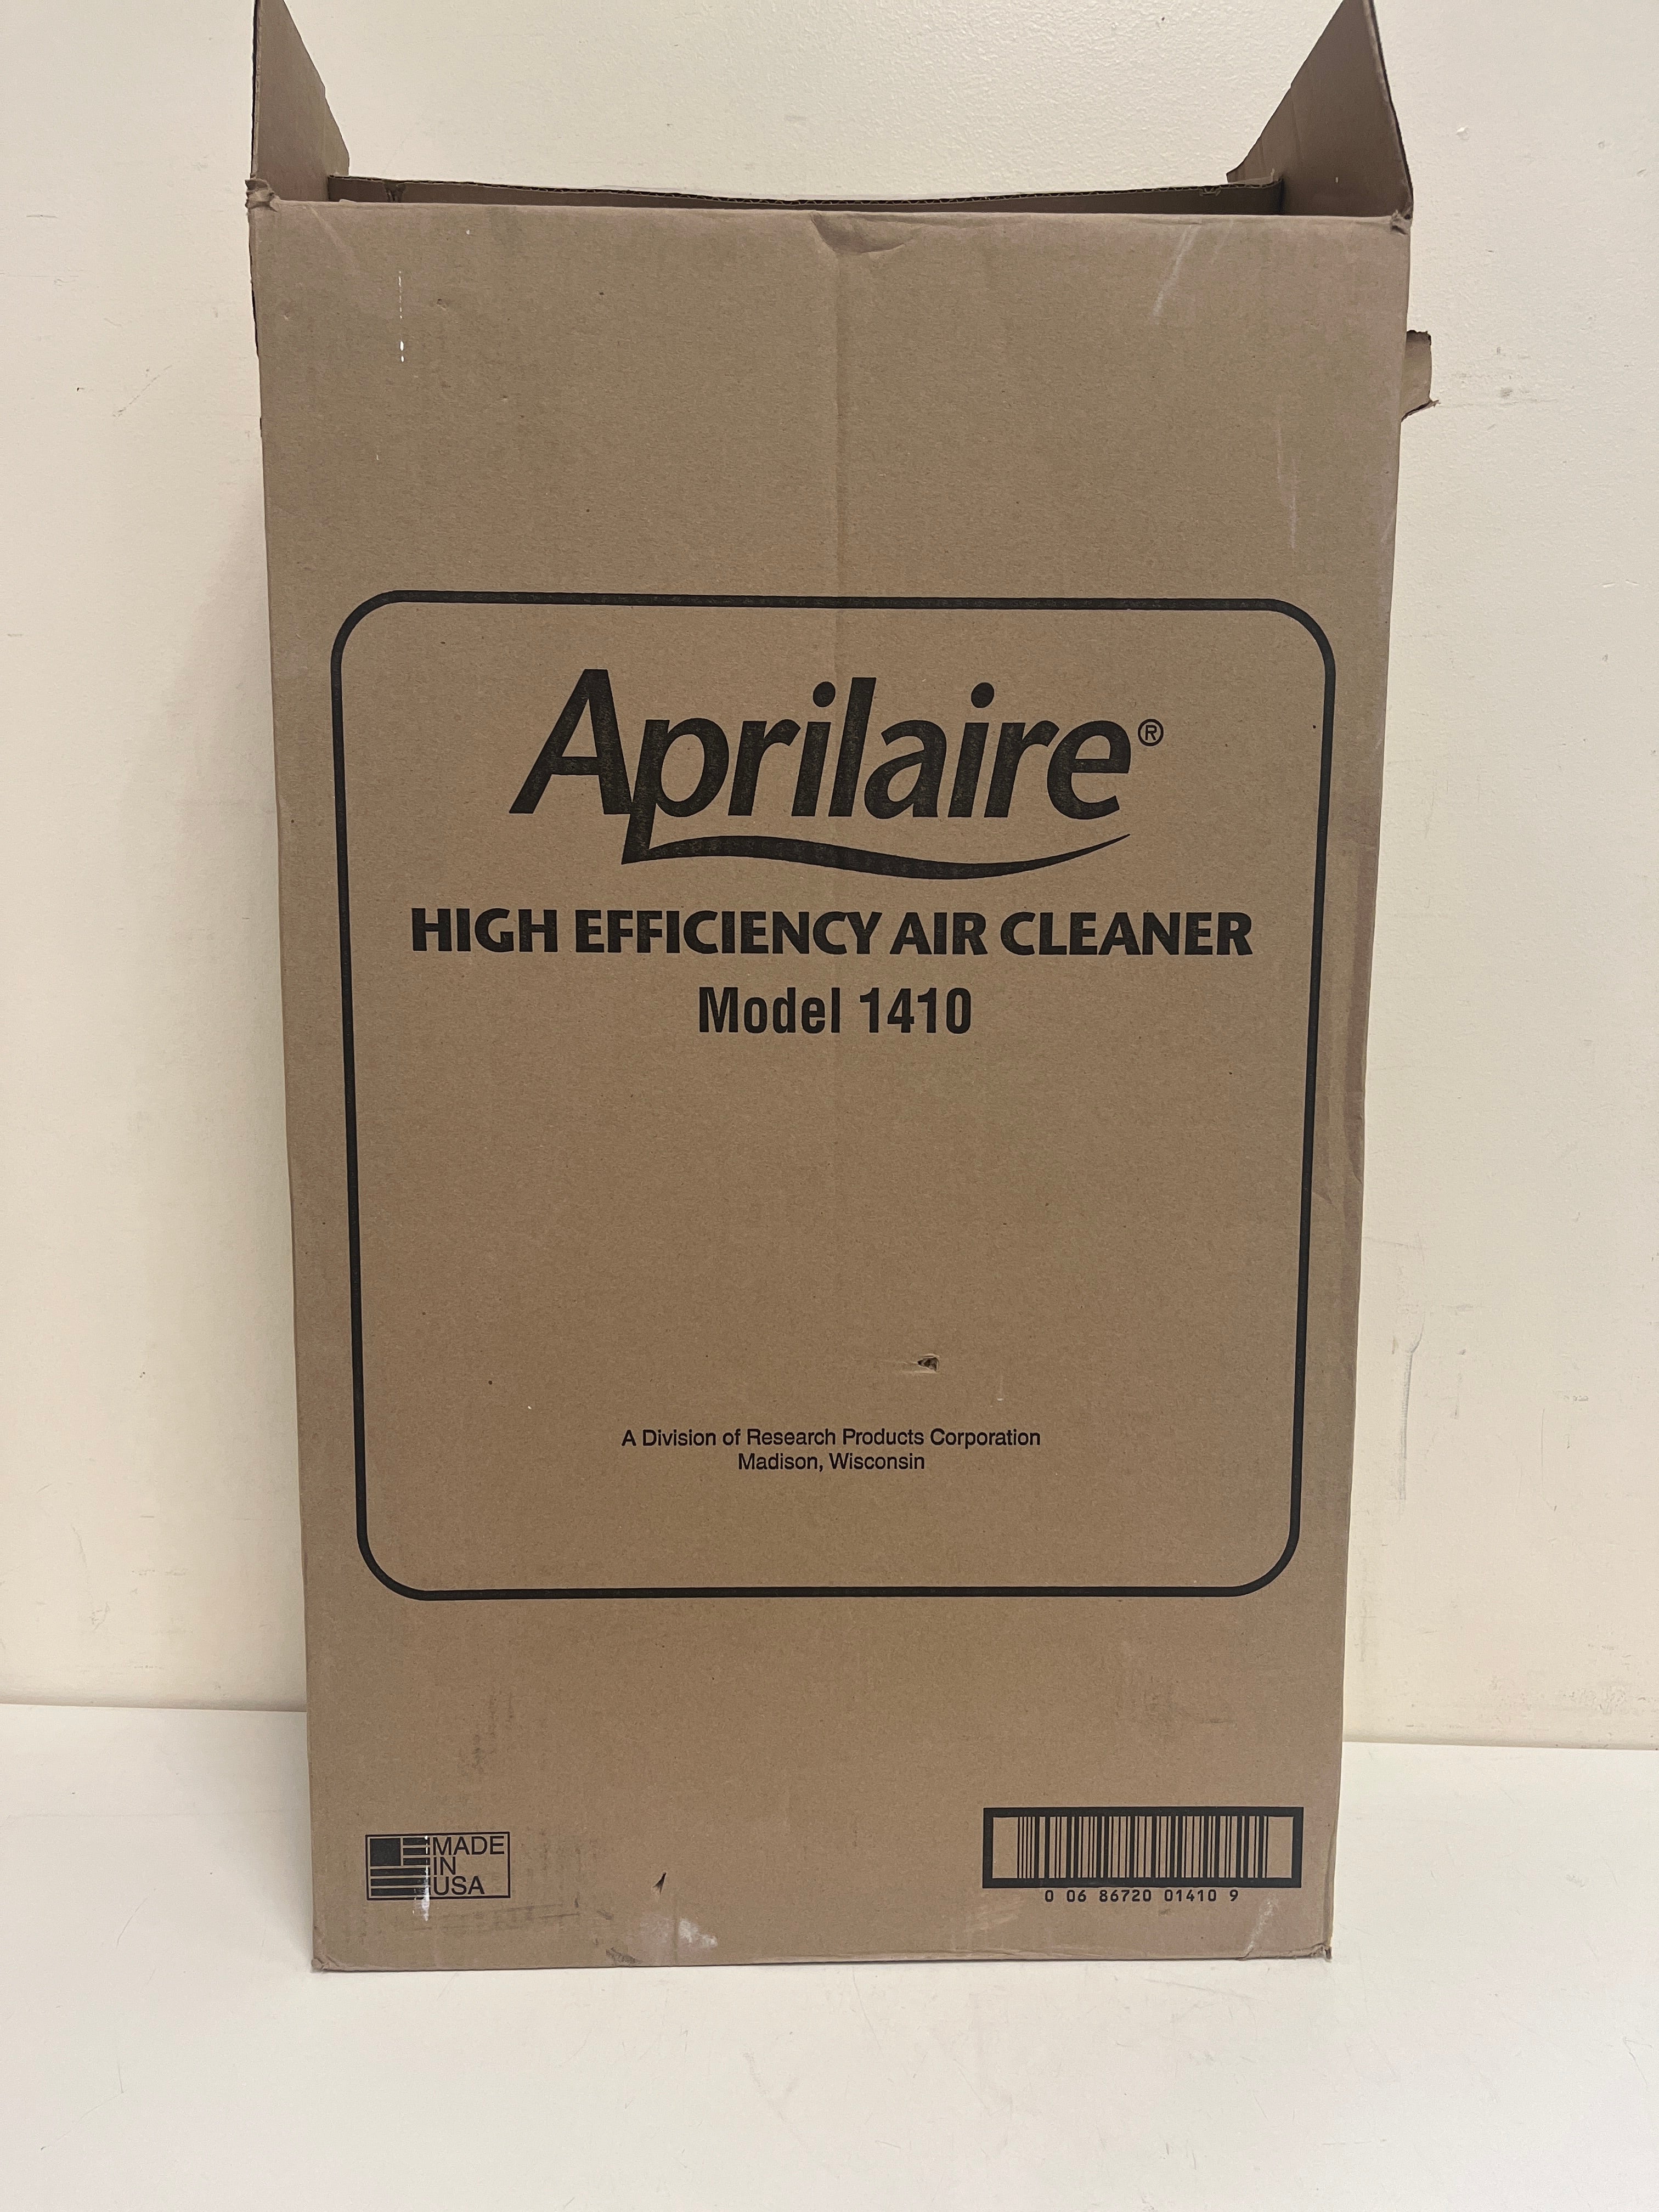 Aprilaire High Efficiency Air Cleaner With Filter - Model 1410, New In Box